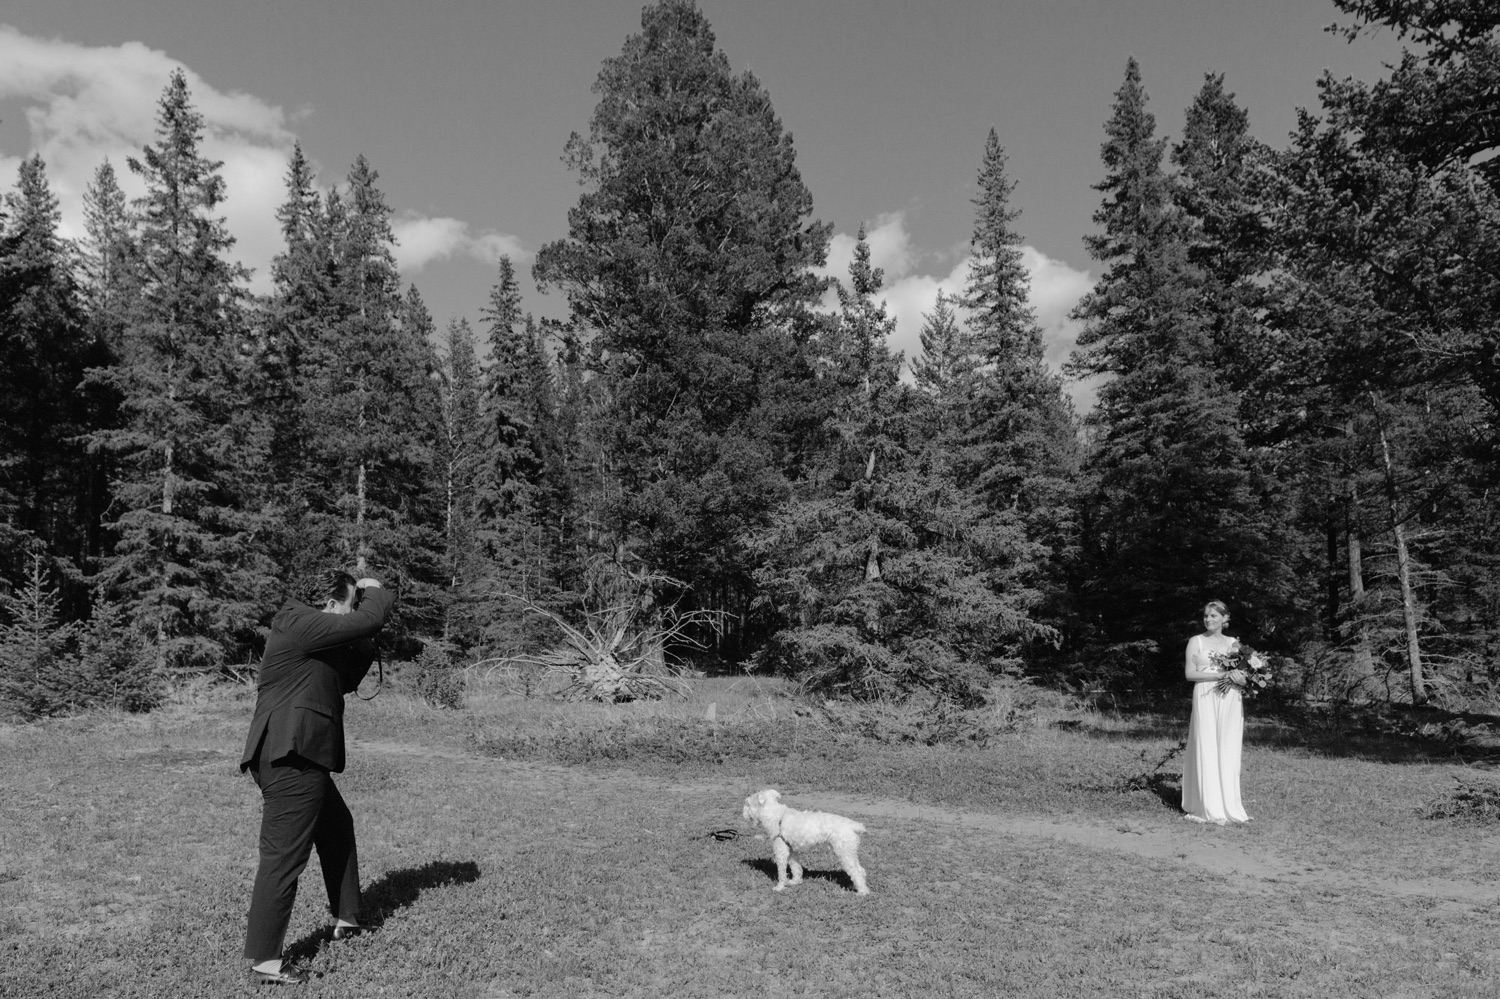 Groom taking photos of his bride on their wedding day at Johnson Lake